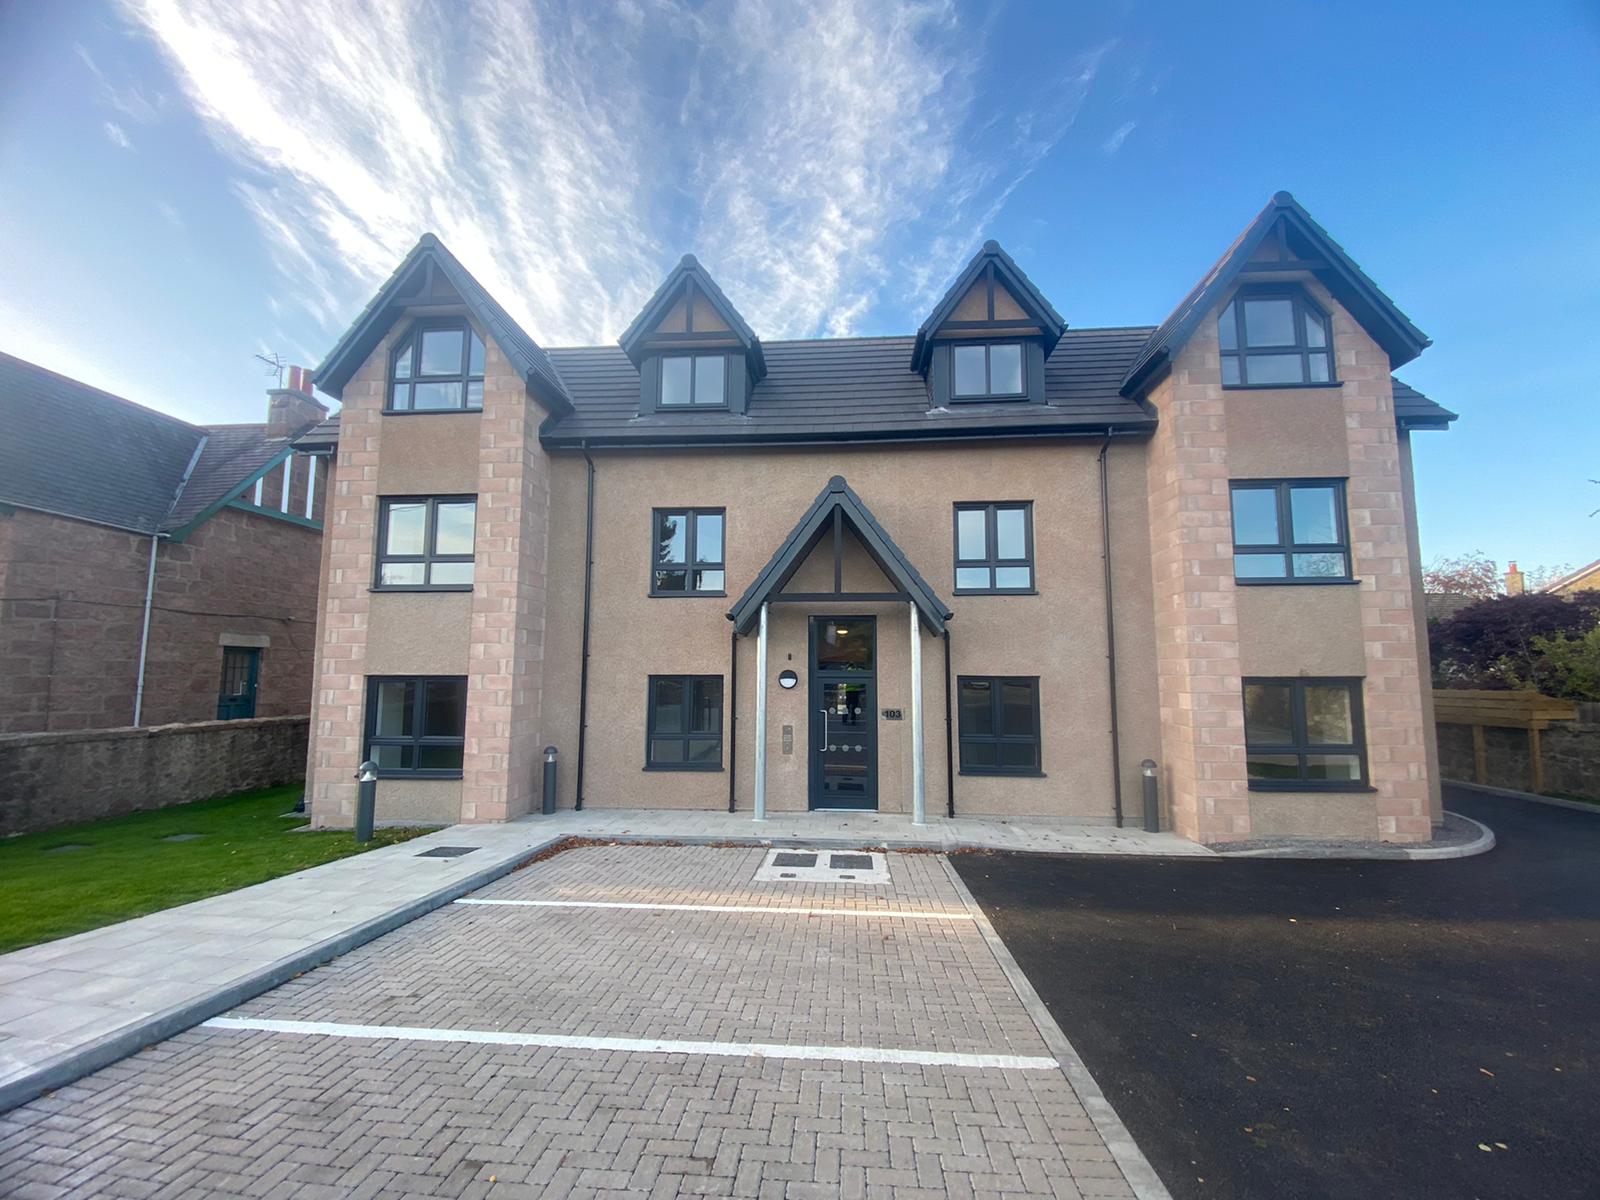 In Pictures: 12 Banchory homes handed over to Grampian Housing Association